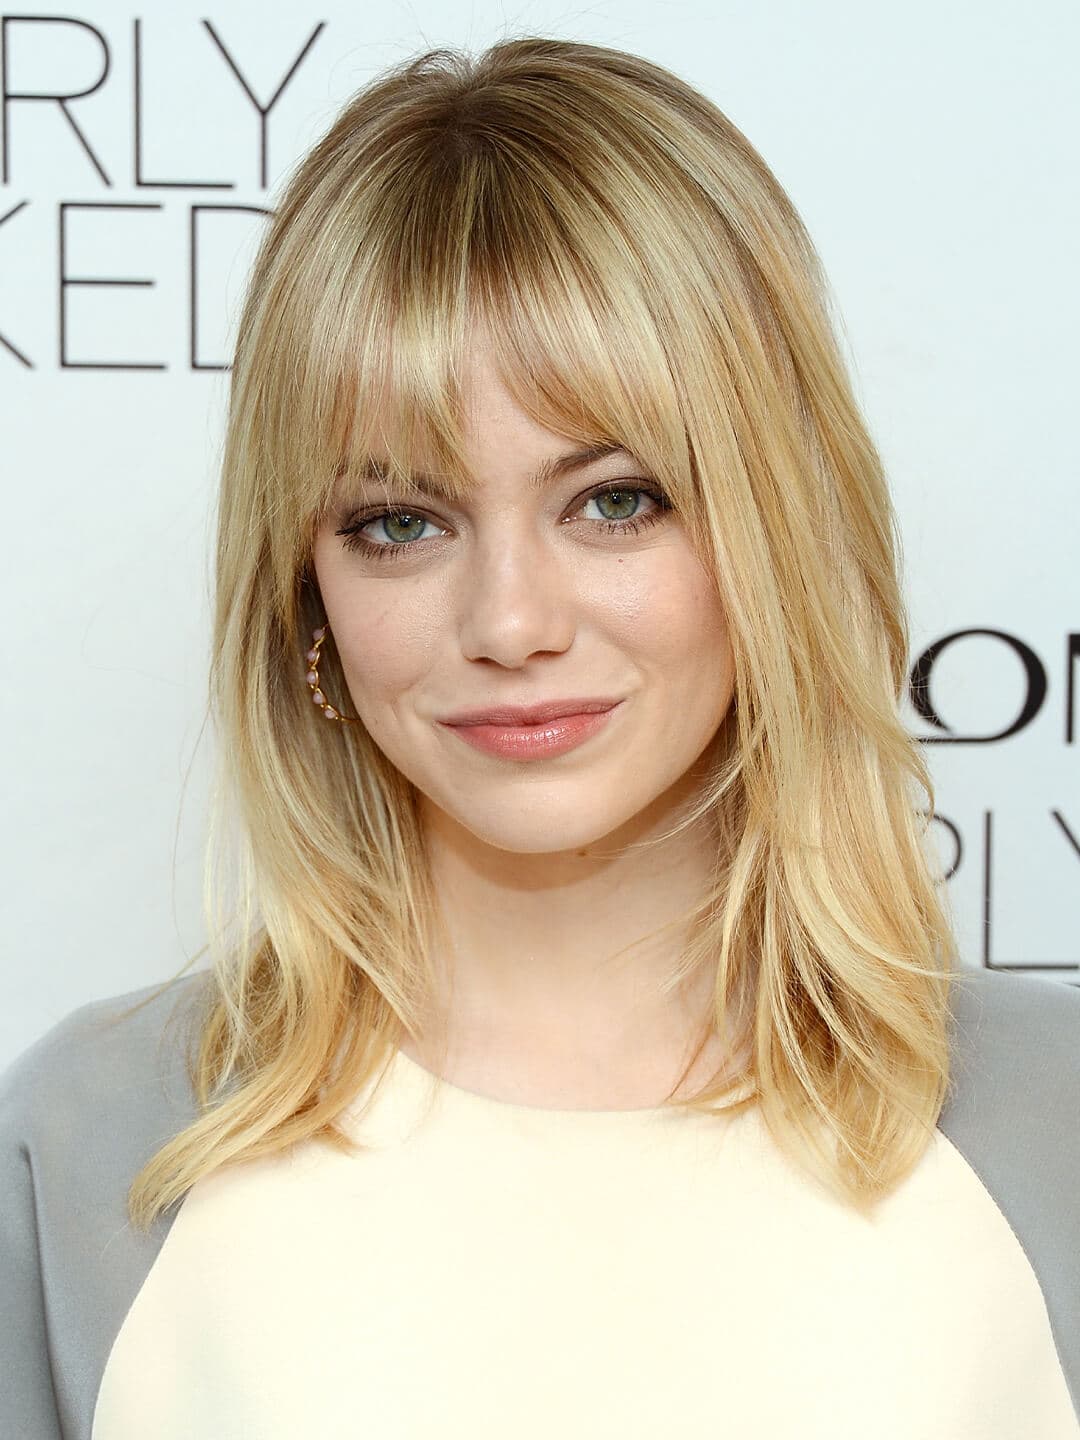 Emma Stone rocking a hairstyle with layered bangs